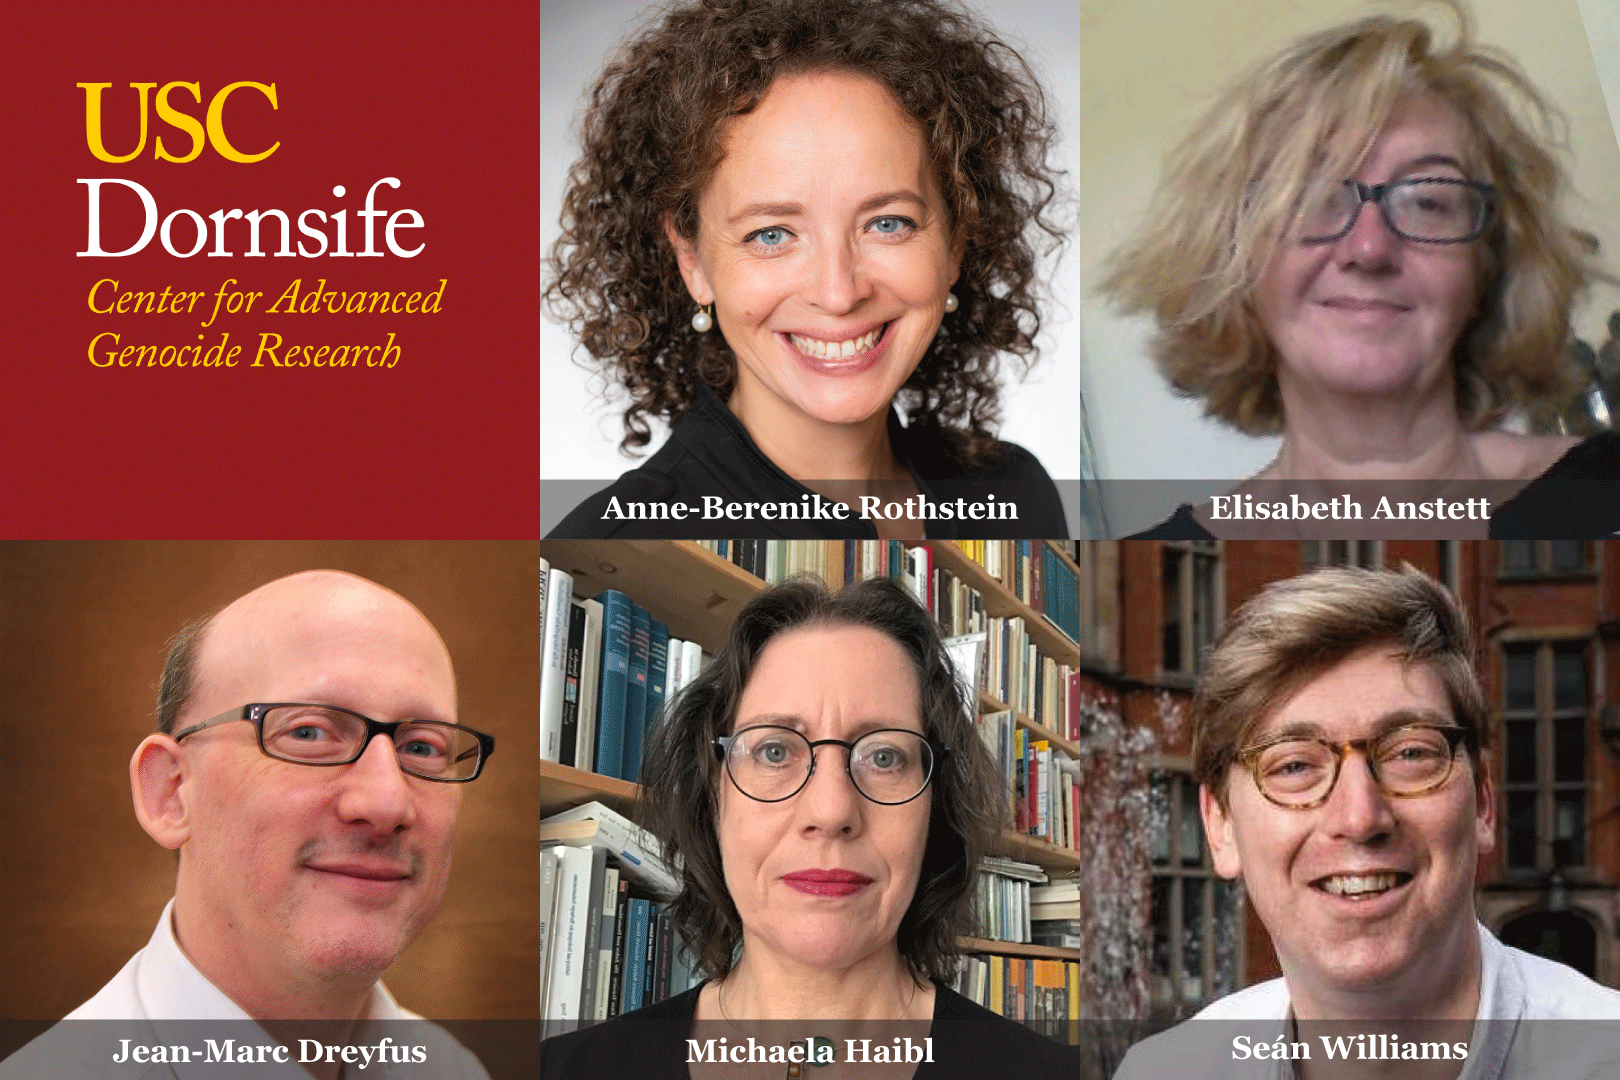 A collage of the center logo and research team headshots. Clockwise, Anne-Berenike Rothstein, Elisabeth Anstett, Seán Williams, Michaela Haibl, and Jean-Marc Dreyfus.